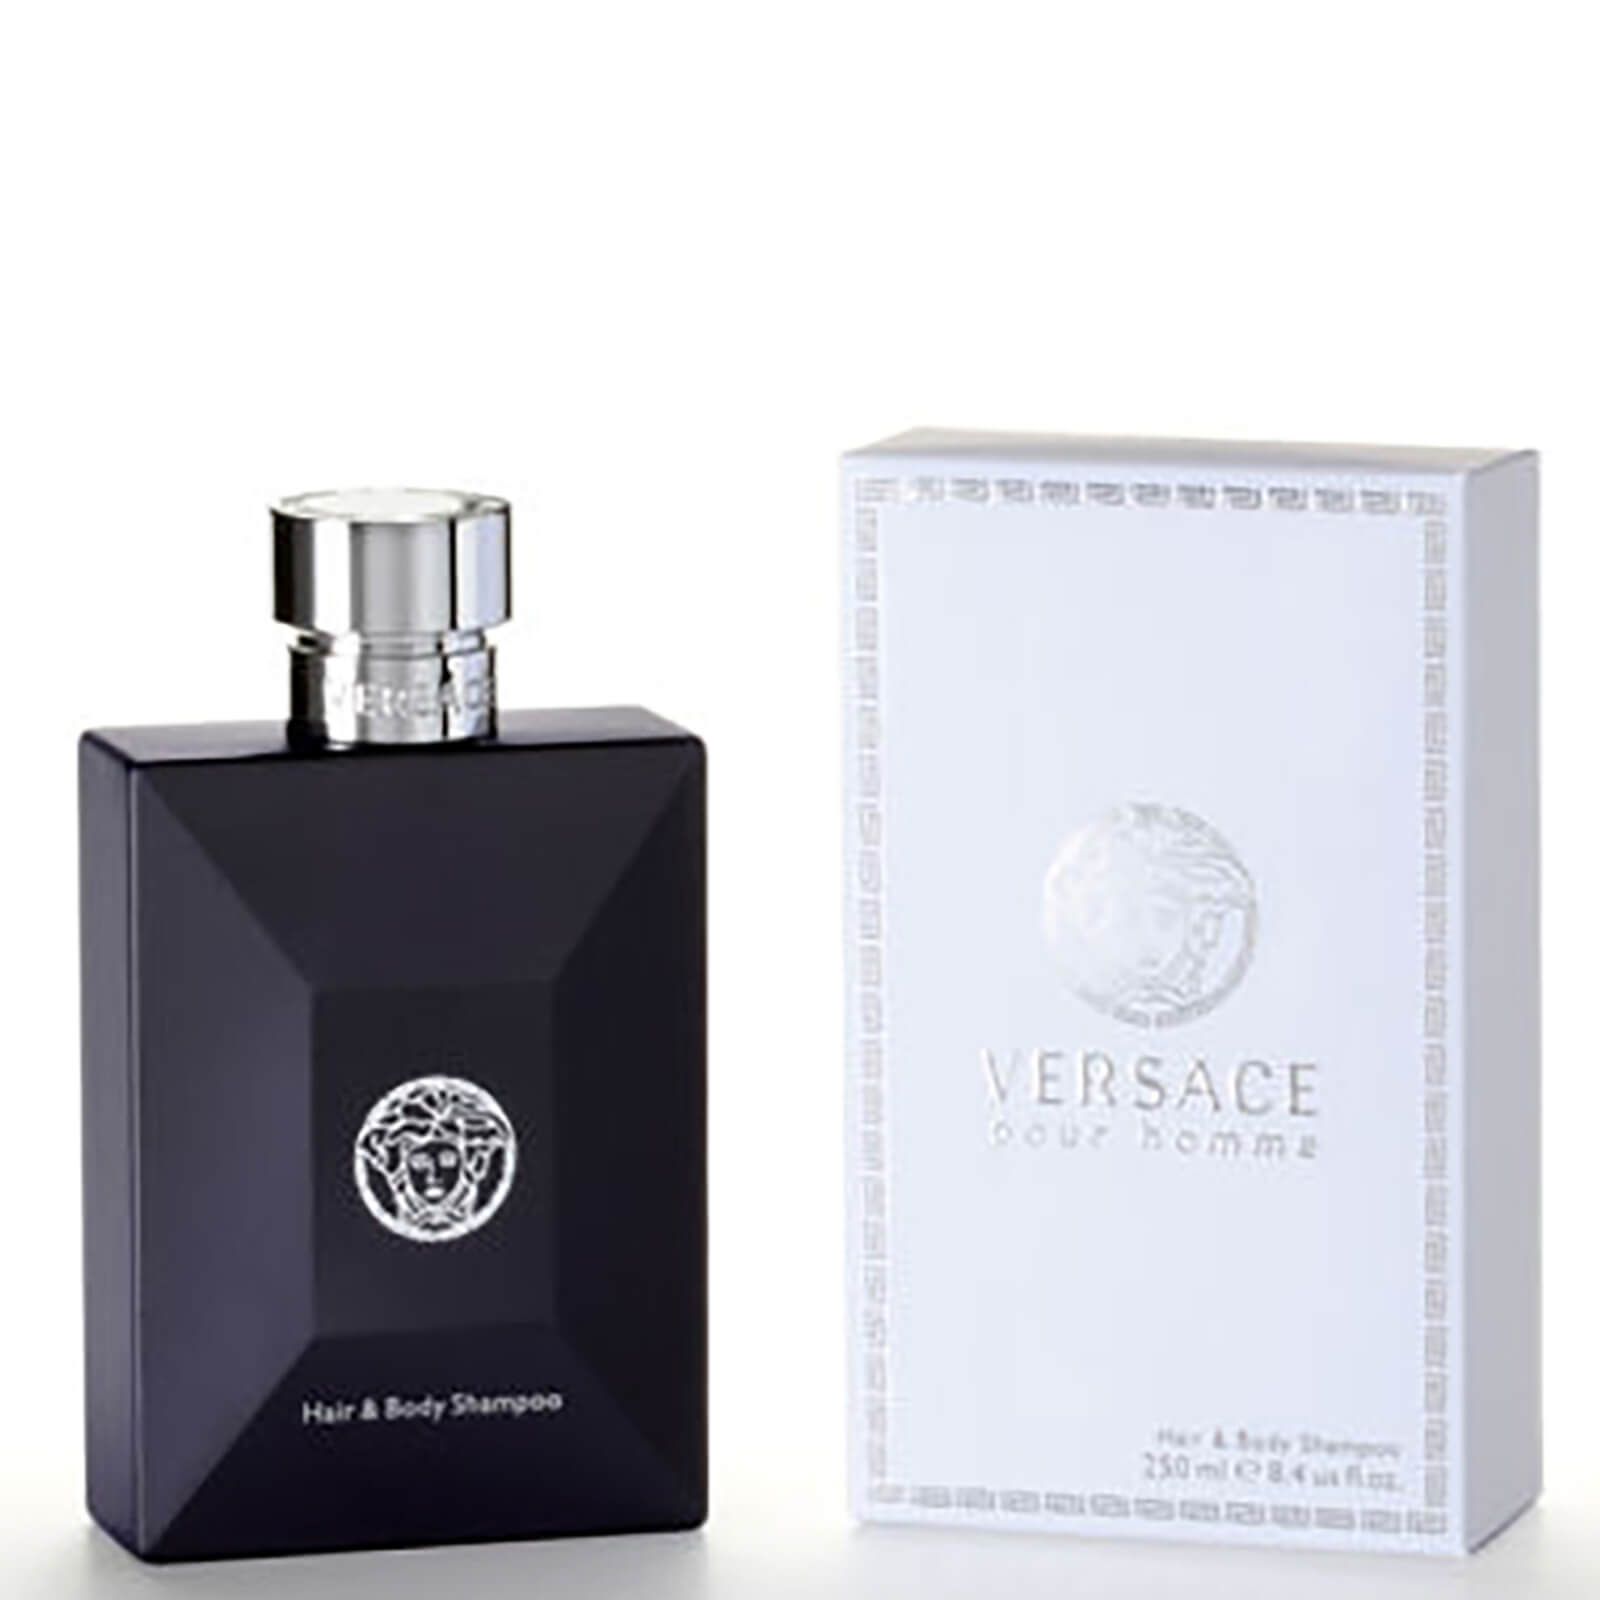 versace pour homme hair and body shampoo